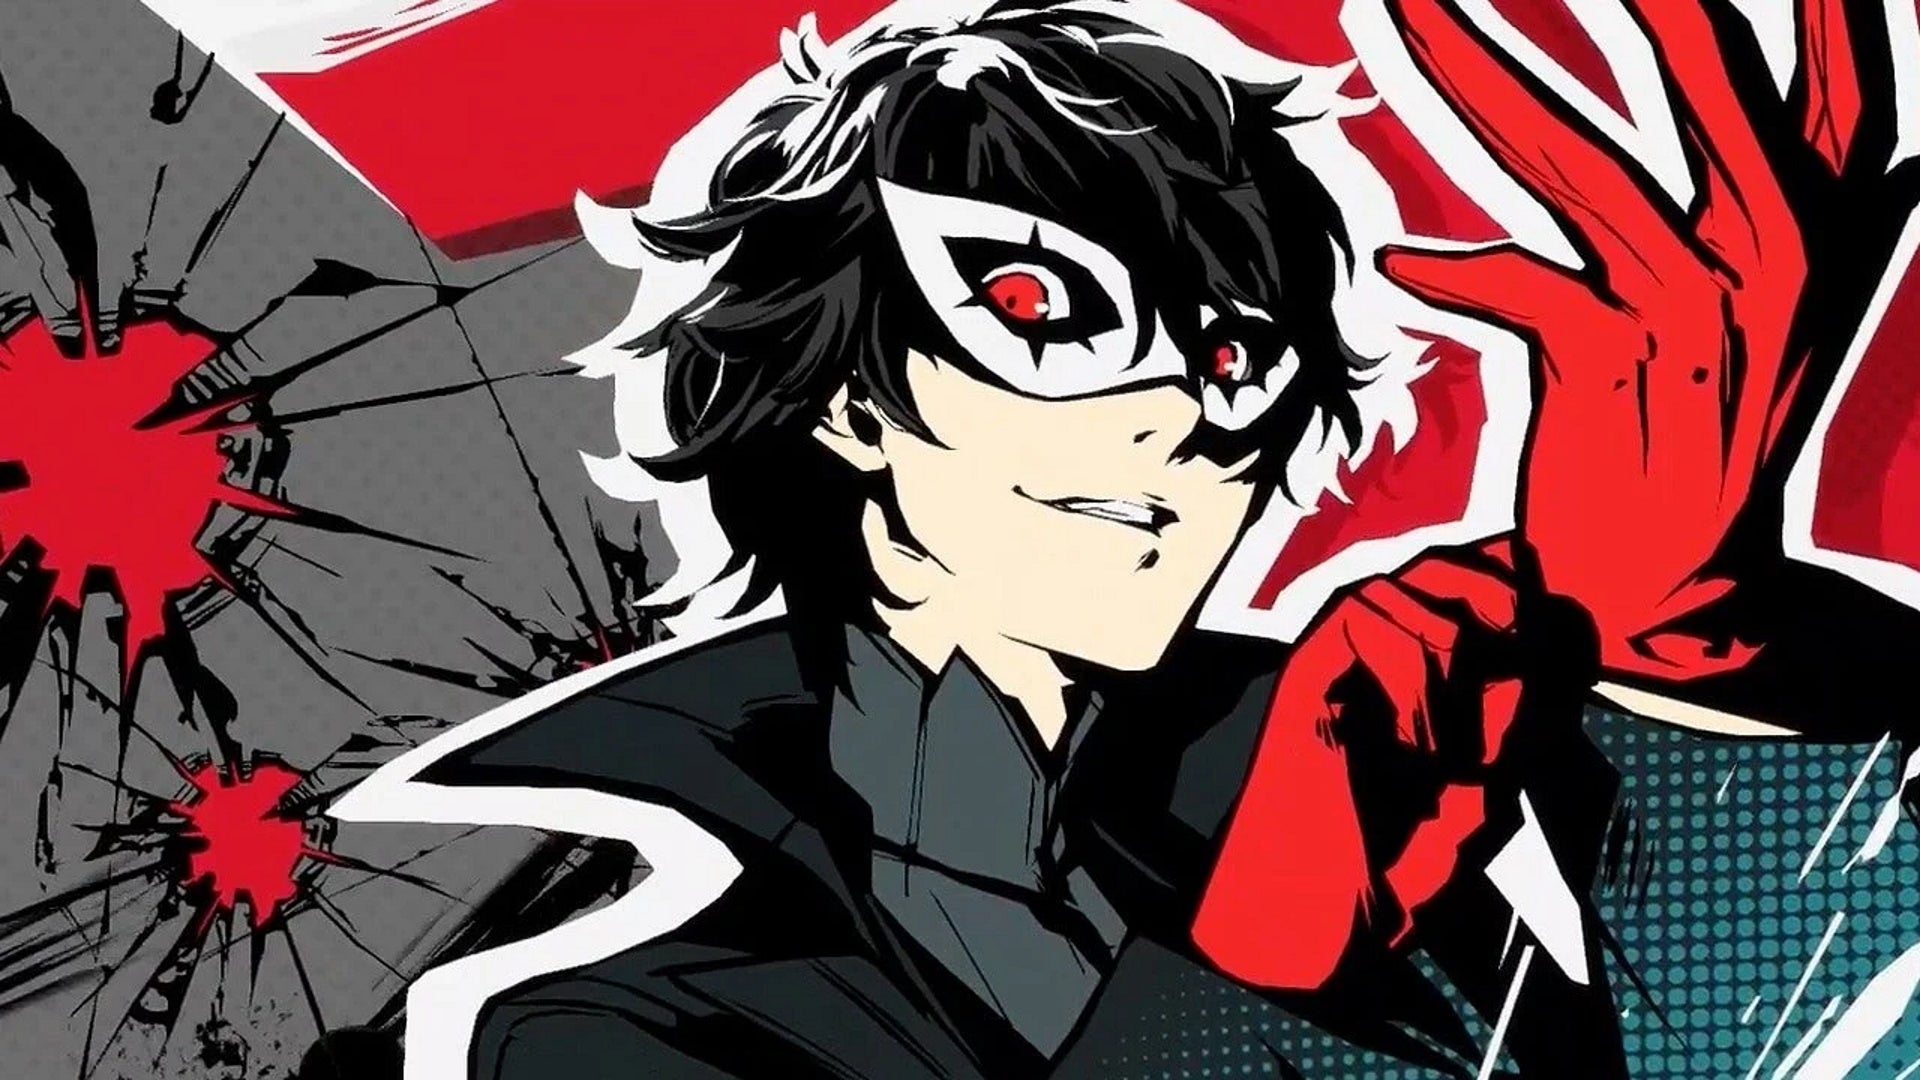 Persona 5 Royal Gift Guide: An animated young man in a white mask pulls on a black glove